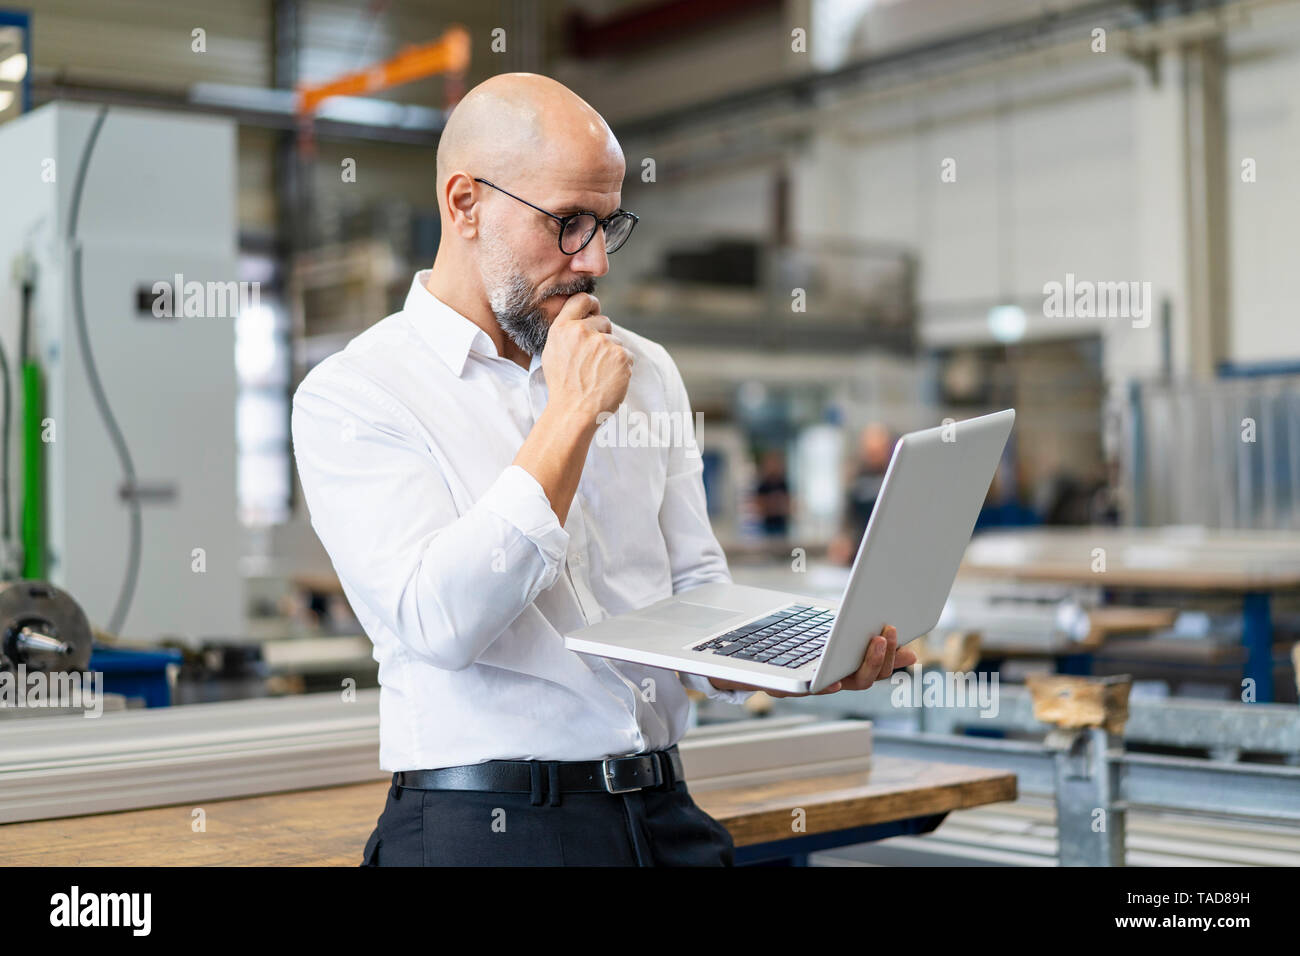 Focused businessman using laptop in factory Stock Photo